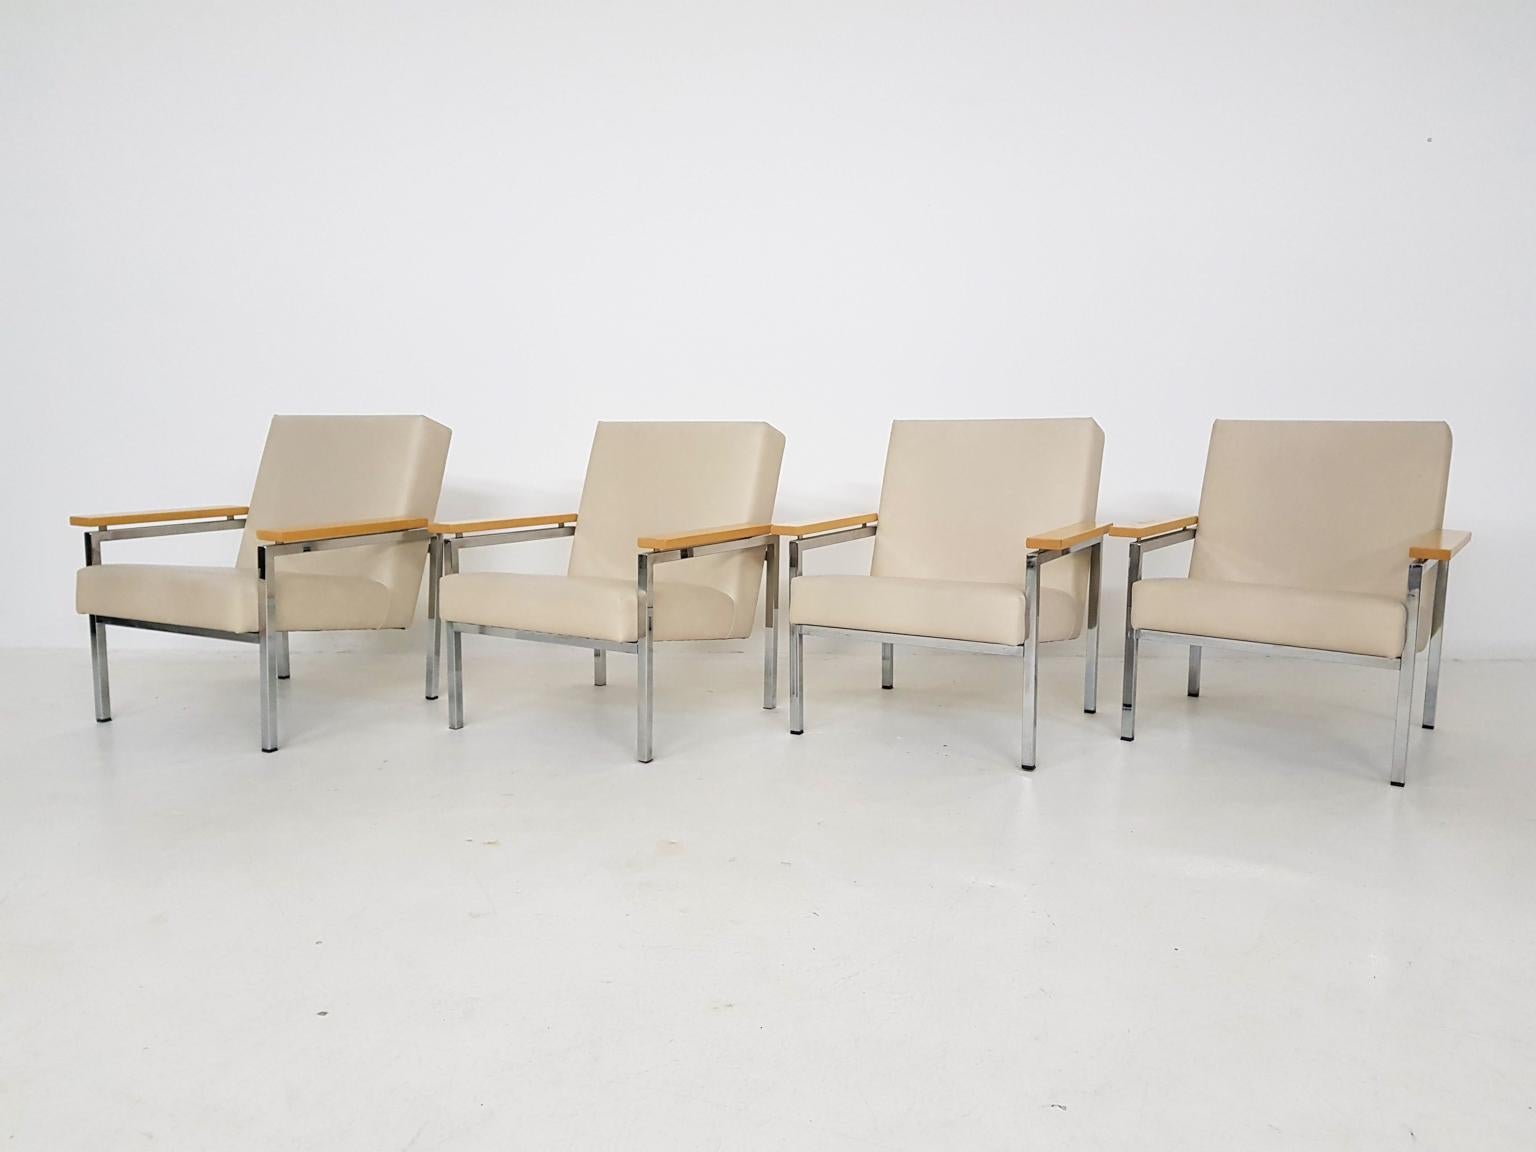 Dutch midcentury design lounge chairs by Gijs Van Der Sluis. Made and produced in the 1960s in the Netherlands.

The lounge or arm chairs have a chrome frame with wooden arm rests and beige leather upholstery. In good condition.

Price is per